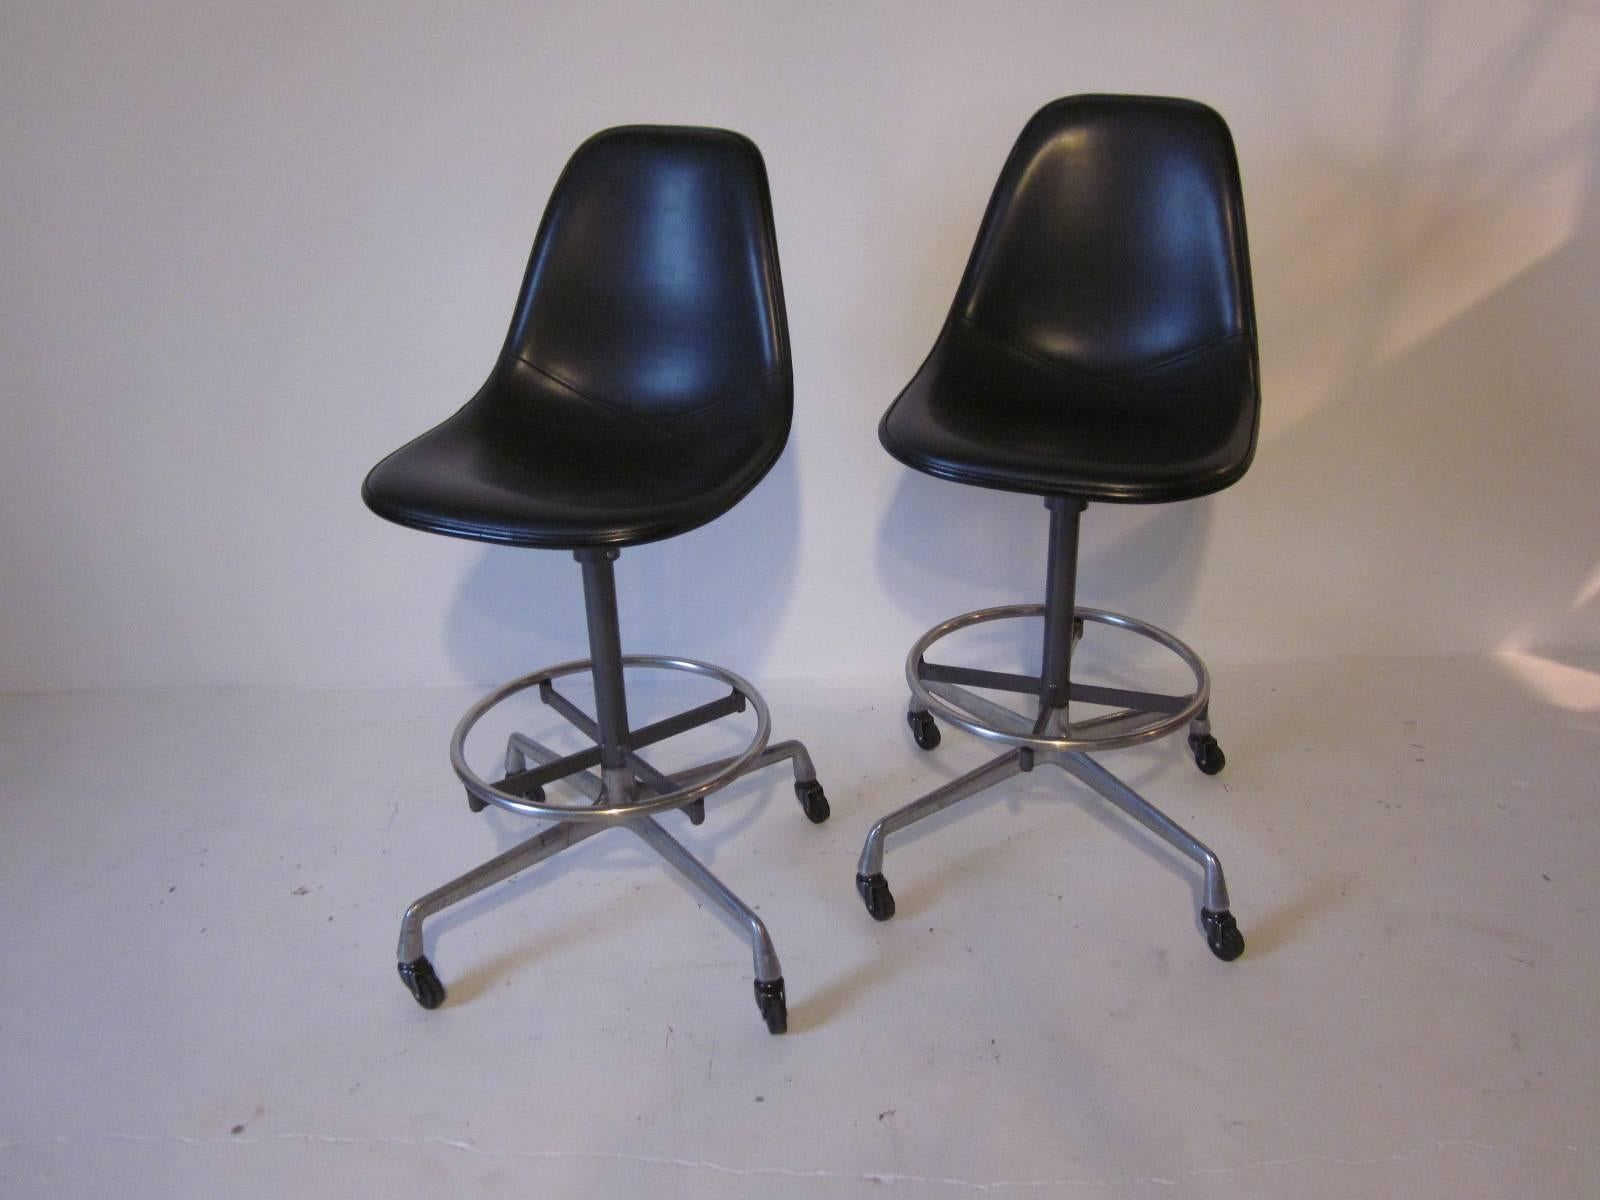 Eames Industrial Architectural Stools 1